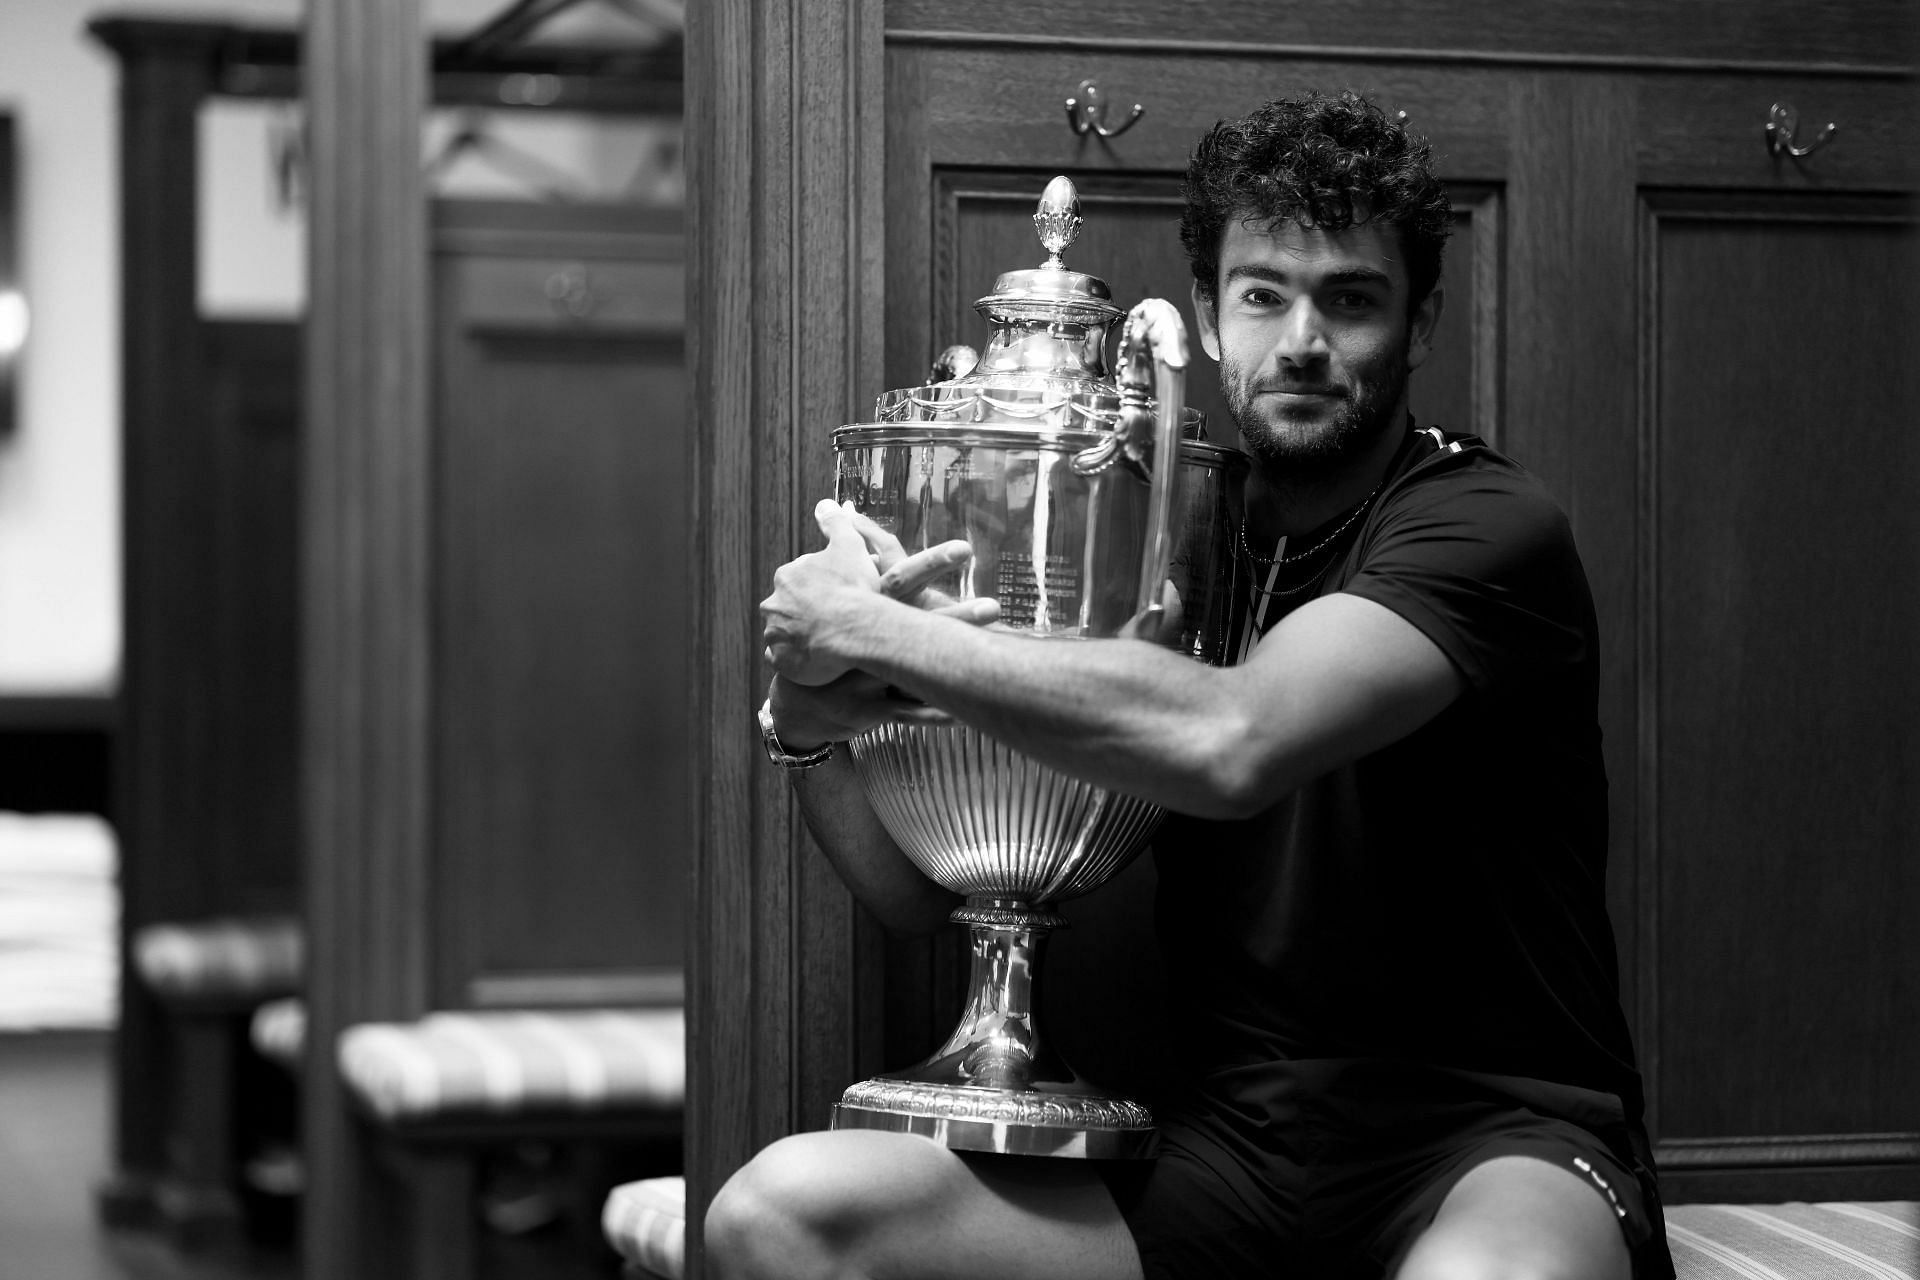 Matteo Berrettini has done exceptionally well after returning from injury